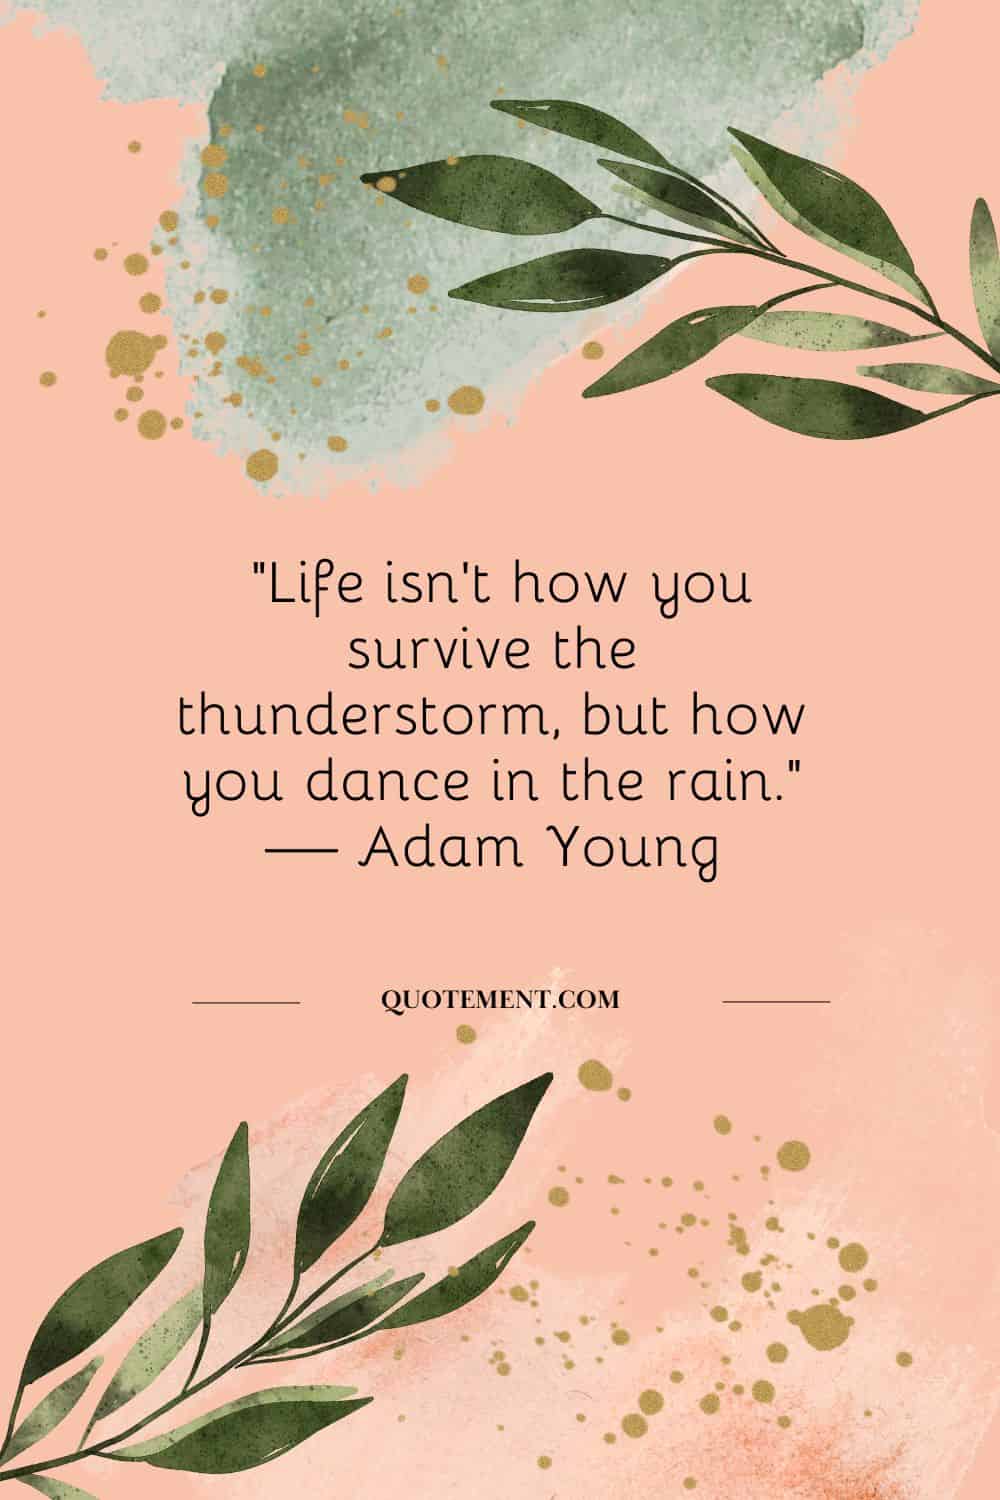 “Life isn’t how you survive the thunderstorm, but how you dance in the rain.” — Adam Young